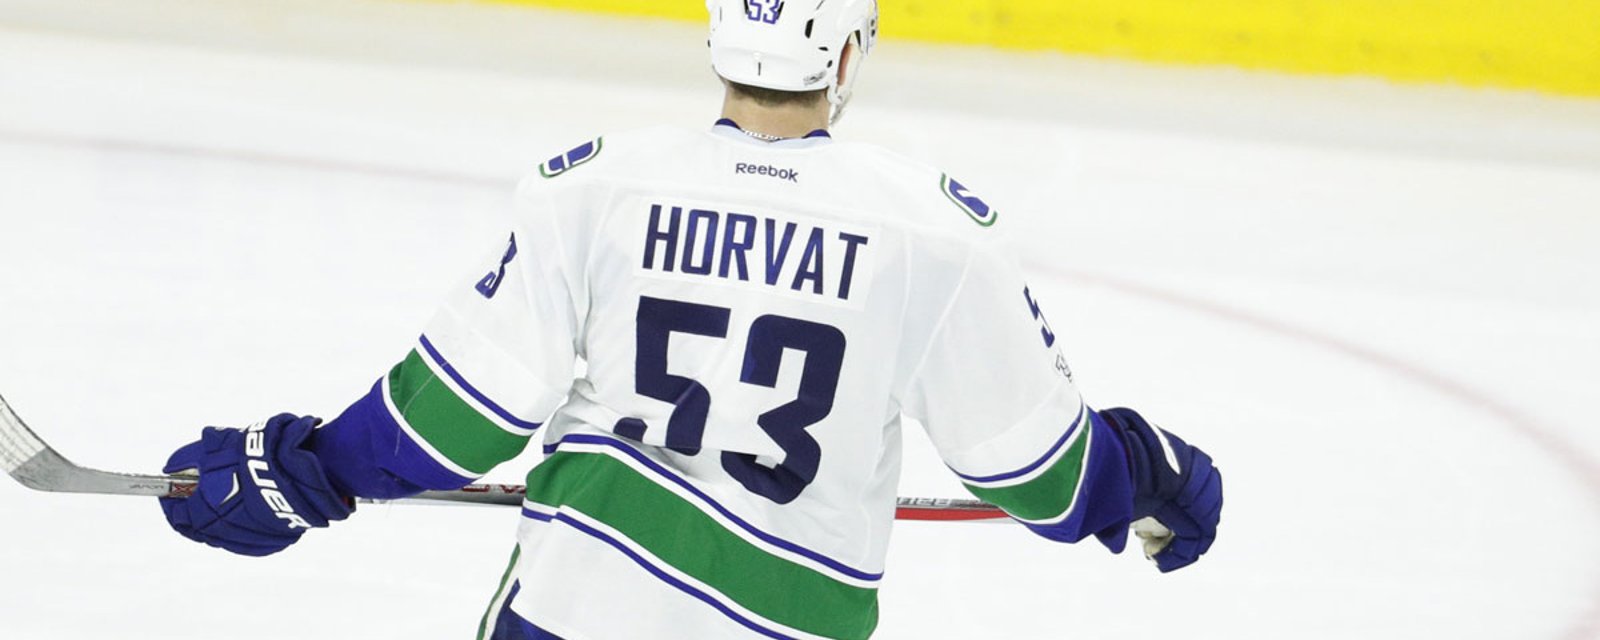 Injury report: Canucks’ Horvat out a week